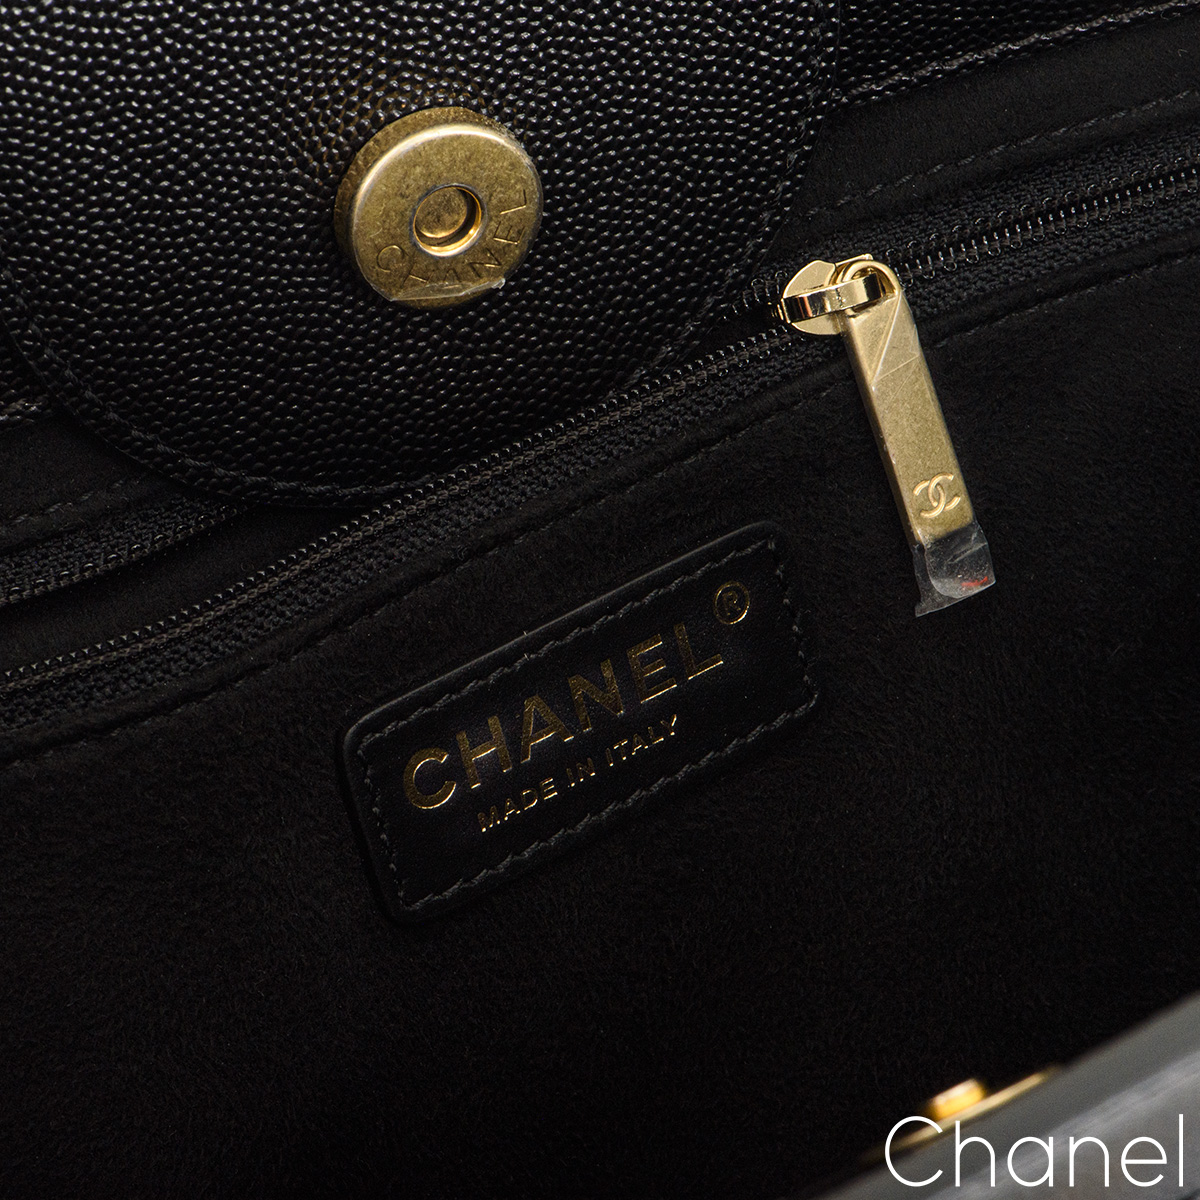 Chanel Small Studded Deauville Tote Navy Caviar Aged Gold Hardware